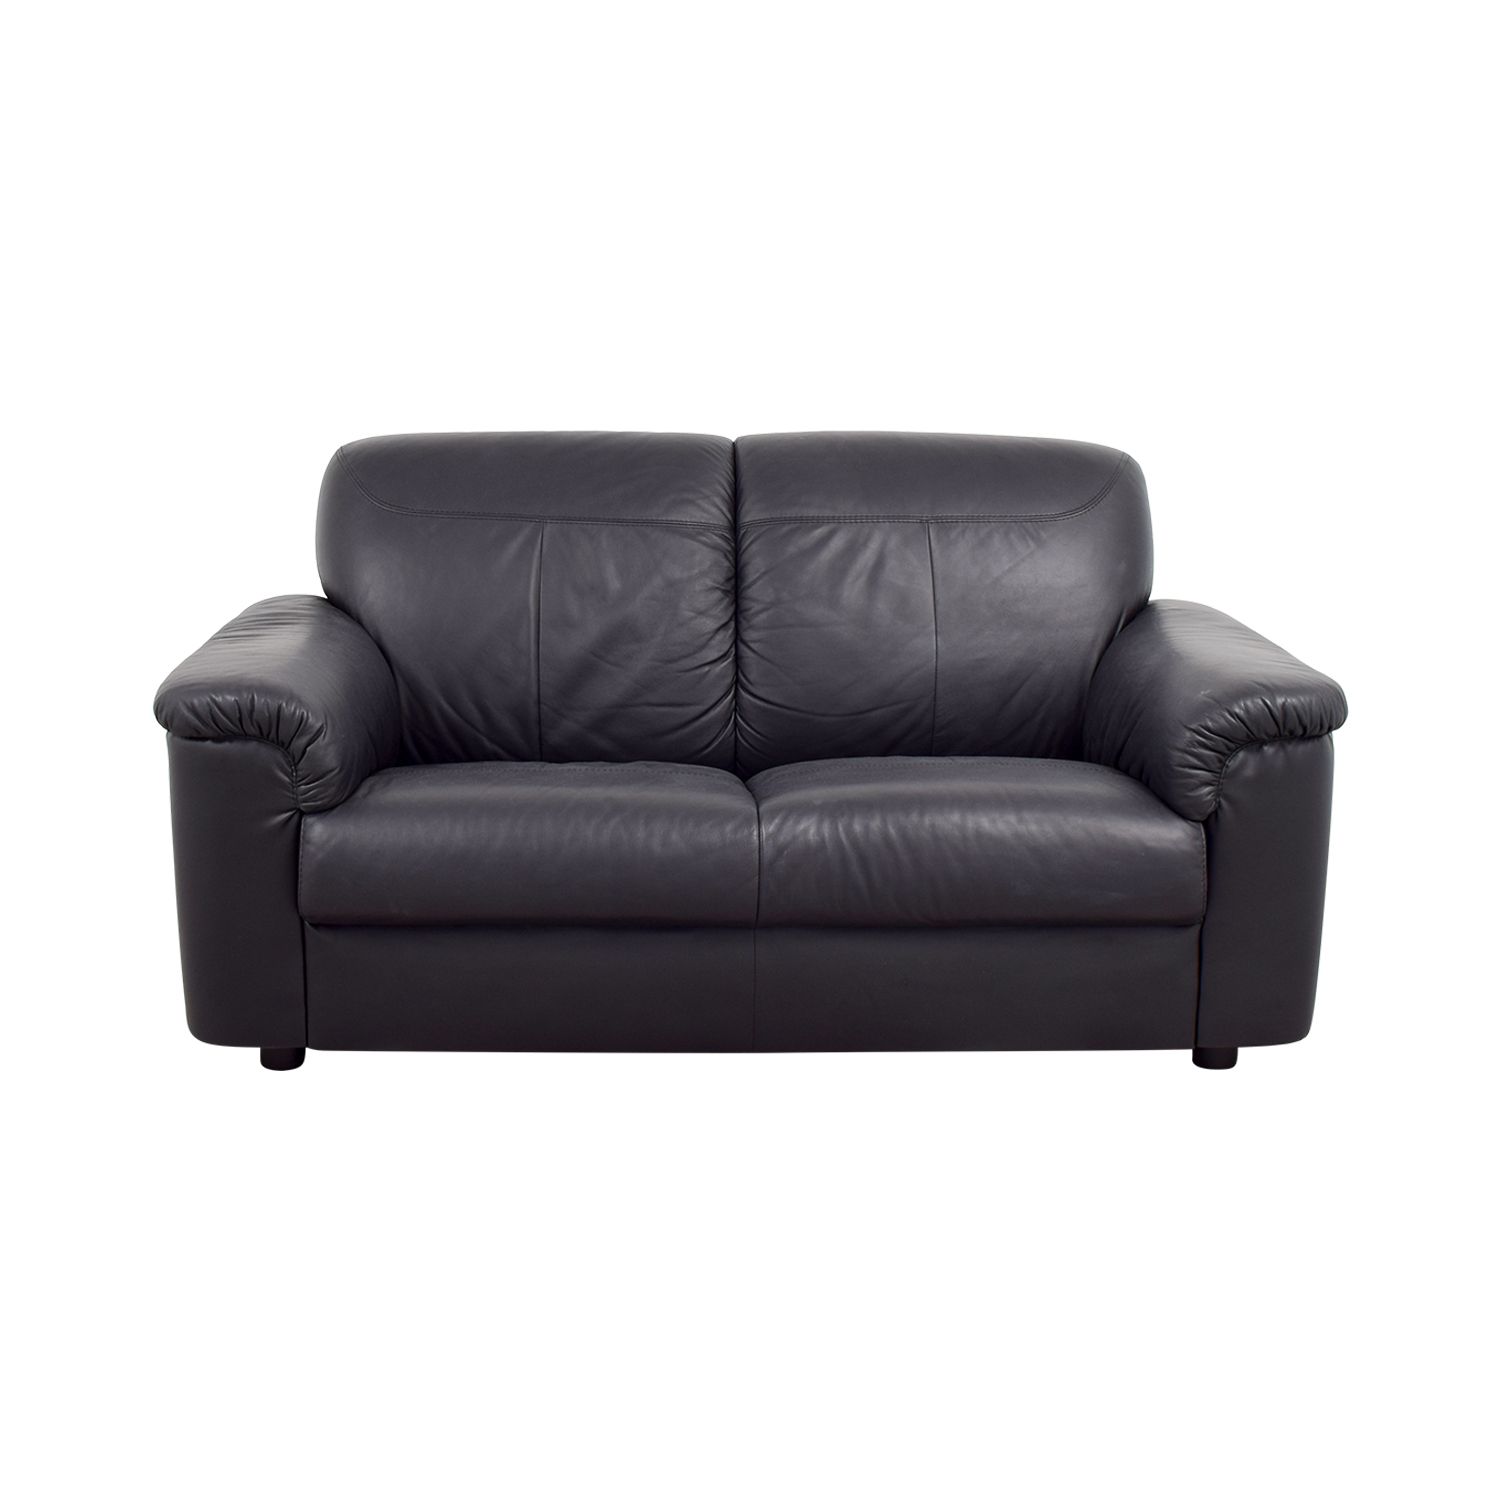 81% Off – Ikea Ikea Black Leather Loveseat With Pillowed Throughout Most Up To Date Leather Bench Sofas (View 13 of 14)